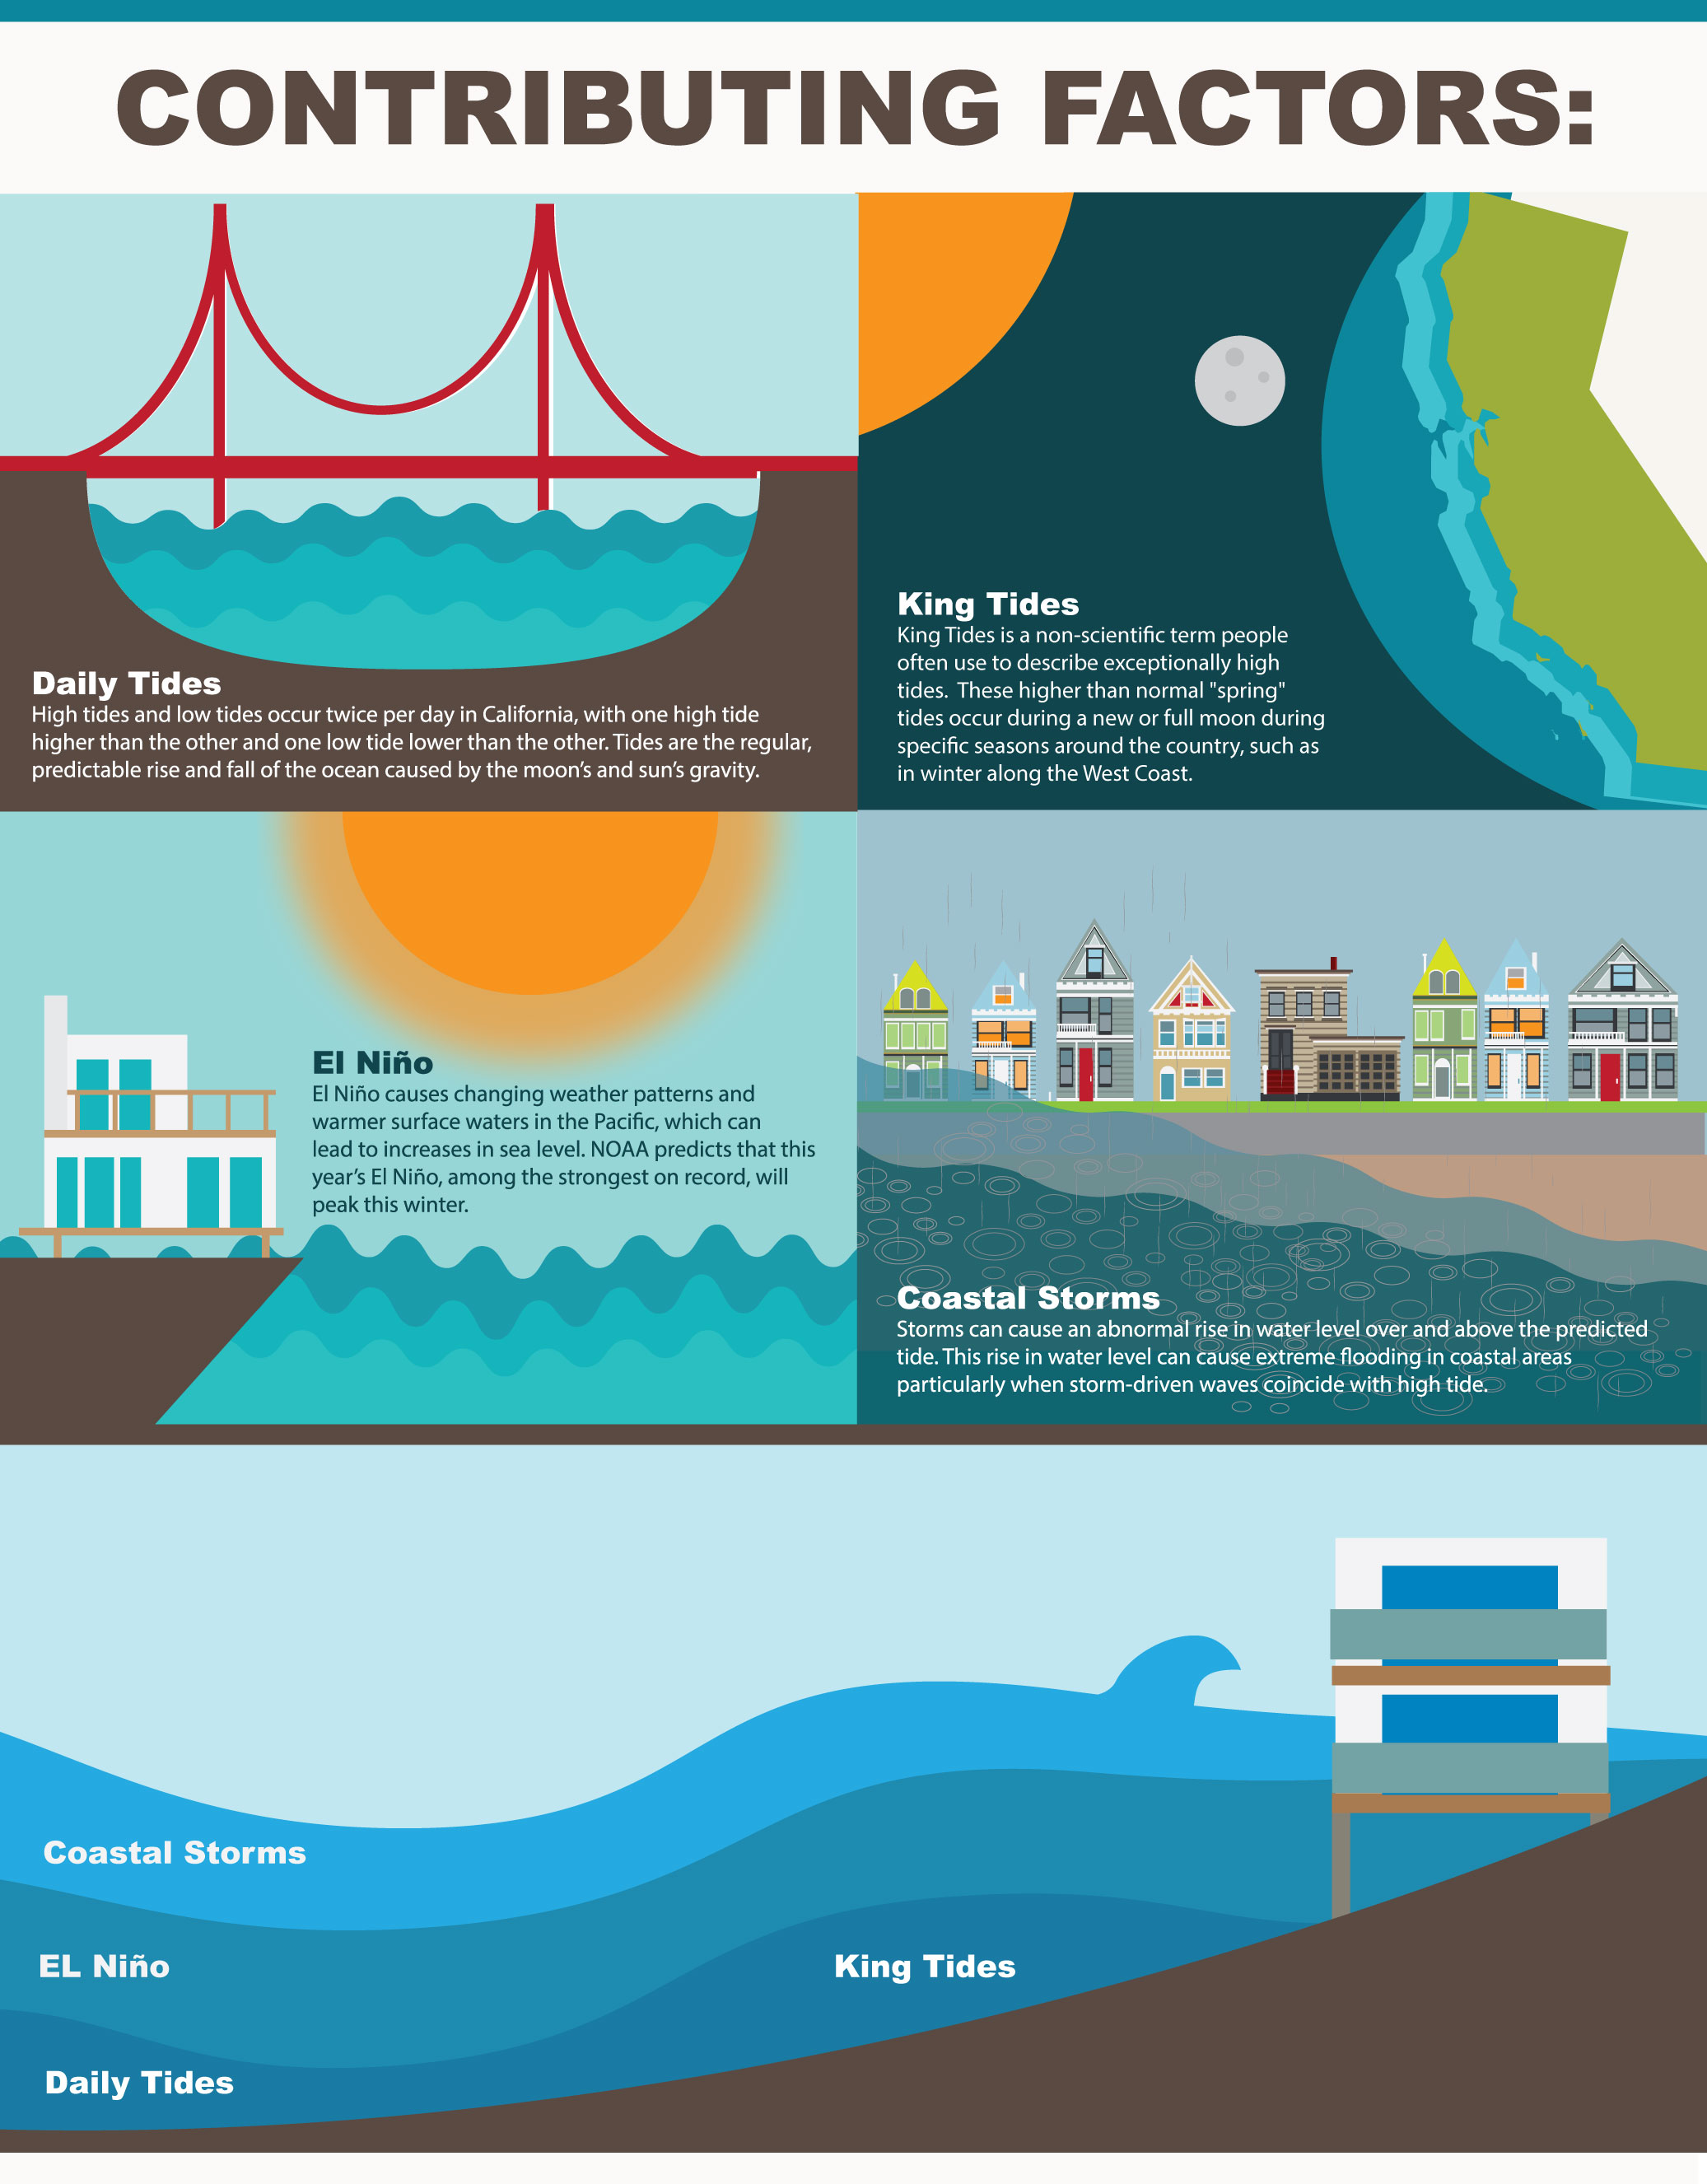 Graphic illustrating contributing factors to nuisance flooding in California: high tides, including daily tides, perigean spring tides, El Niño, and storm surge 